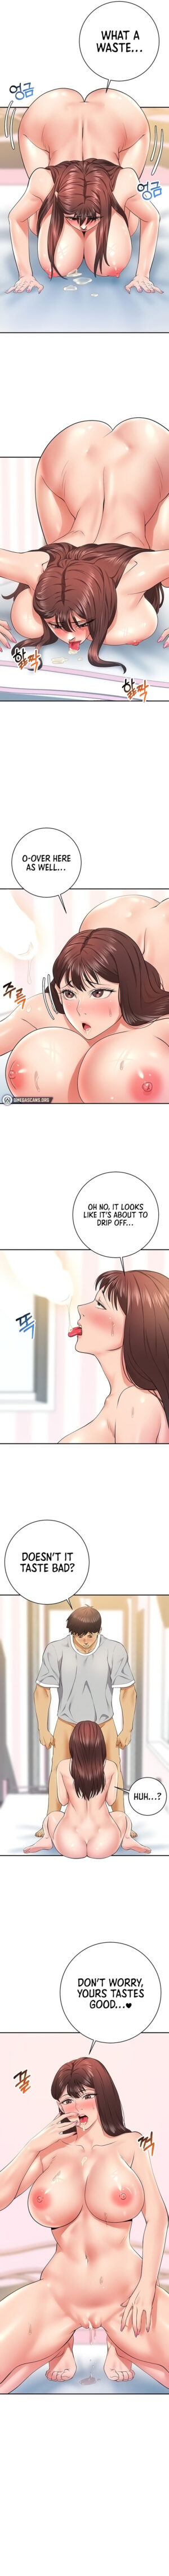 [Peep Show & DongA Writer] Like and Subscribe (1-22) [English] [Omega Scans] [Ongoing]